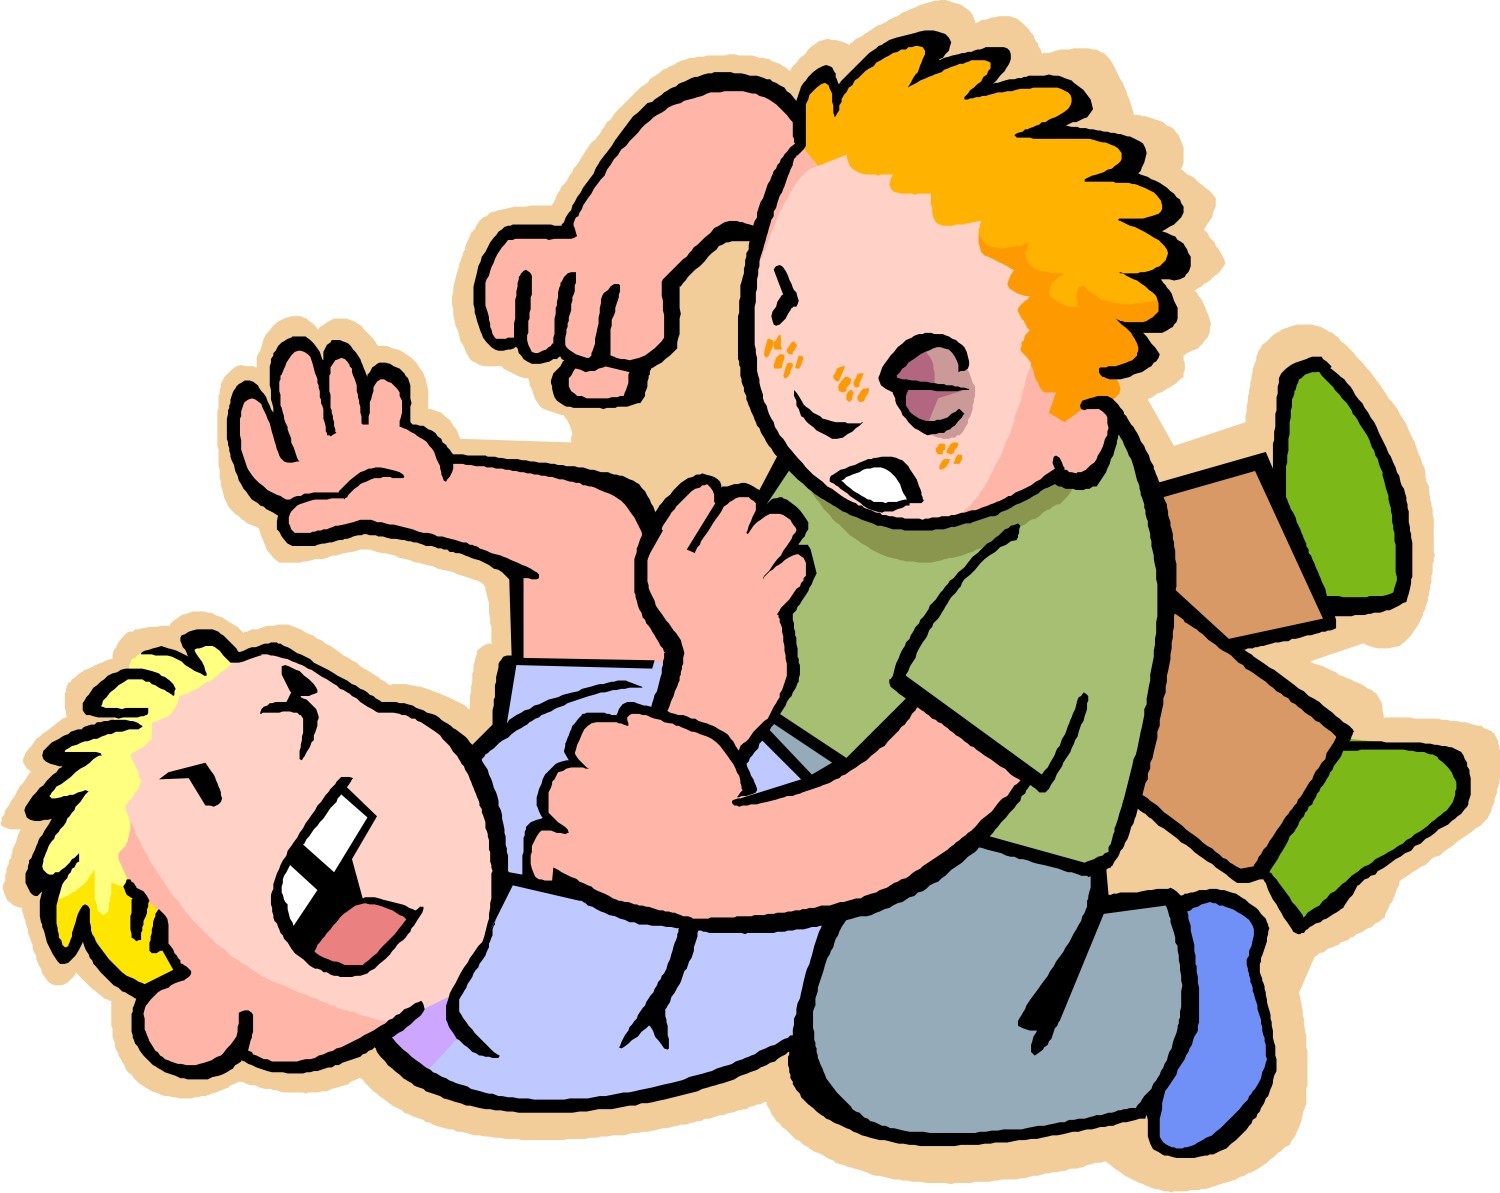 Fighting Cartoon Images - ClipArt Best